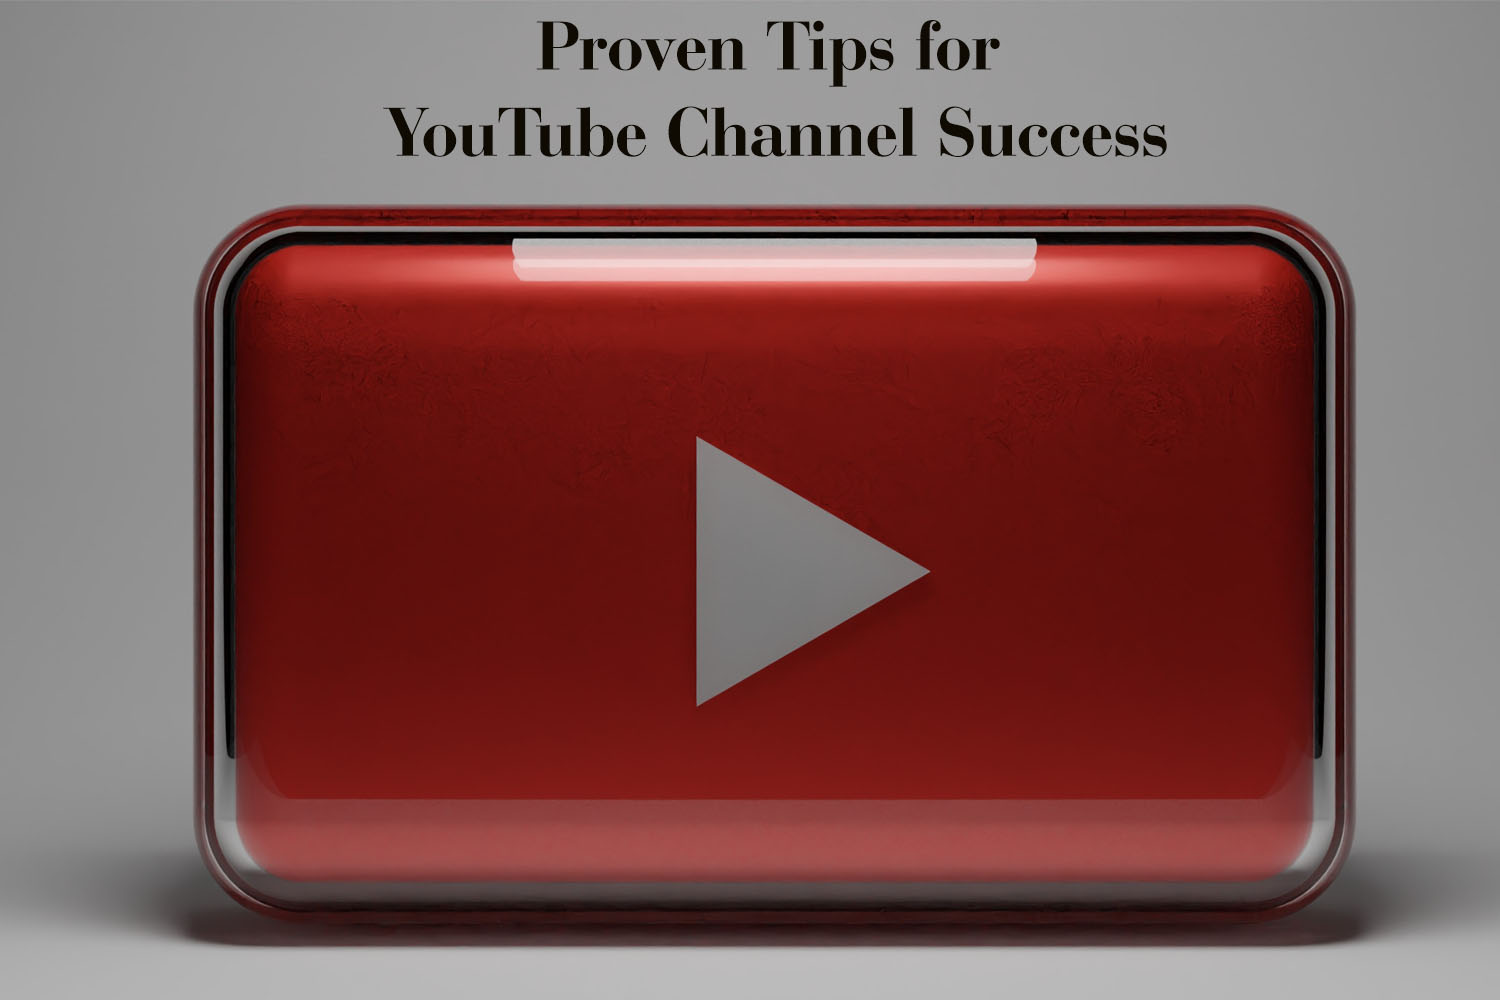 Proven Tips for YouTube Channel Success